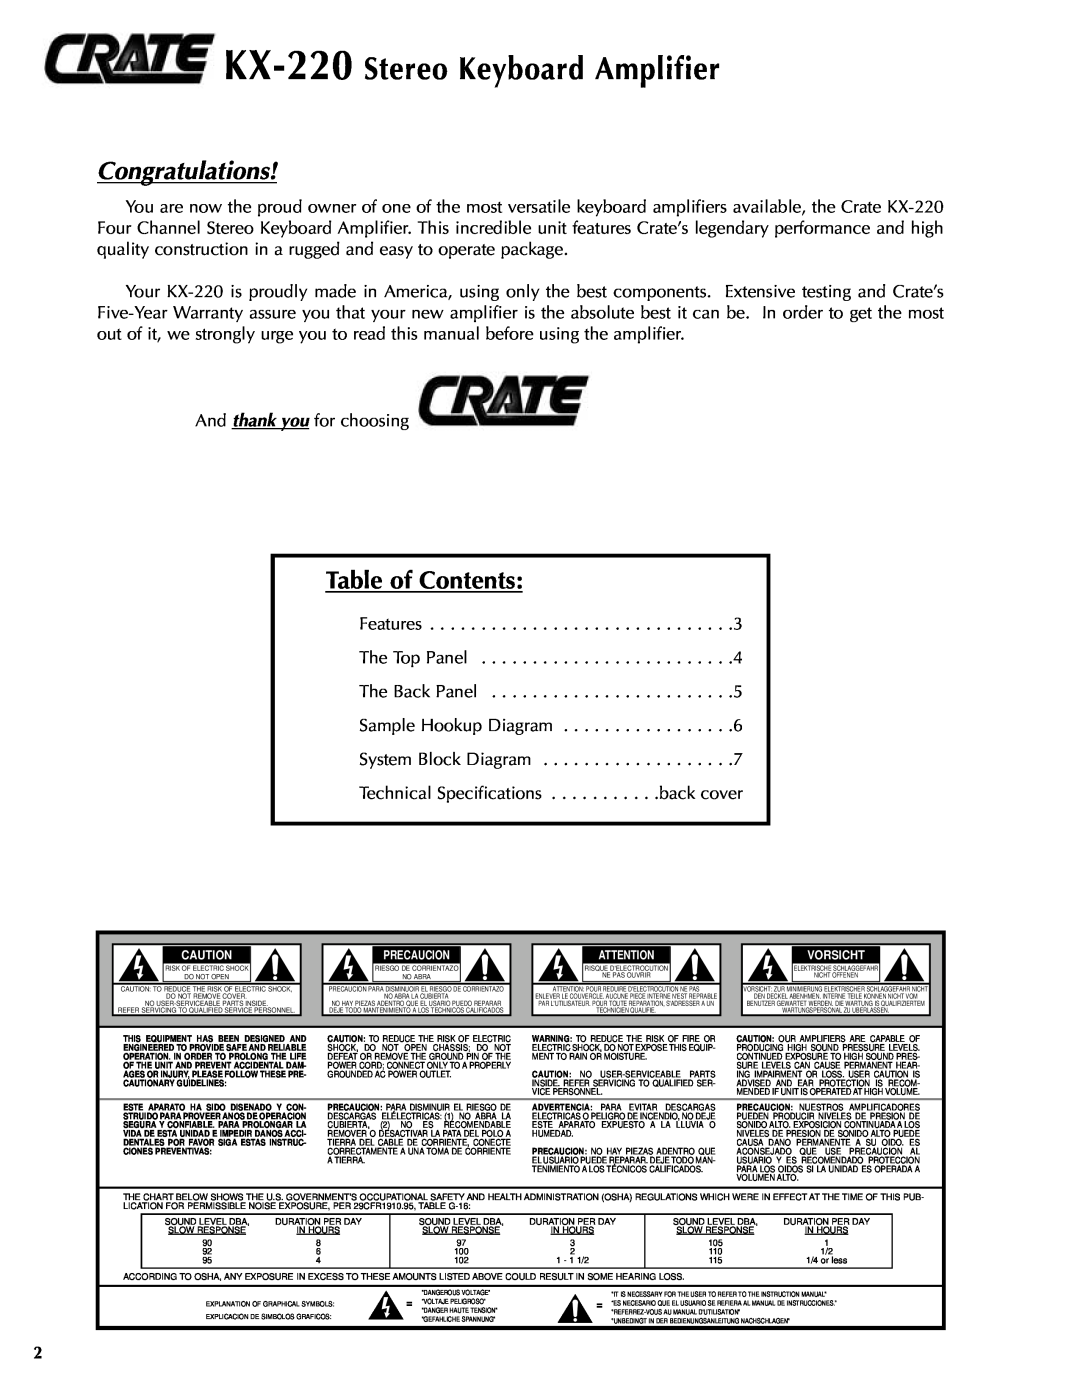 Crate Amplifiers manual KX-220 Stereo Keyboard Amplifier, Table of Contents, Congratulations 